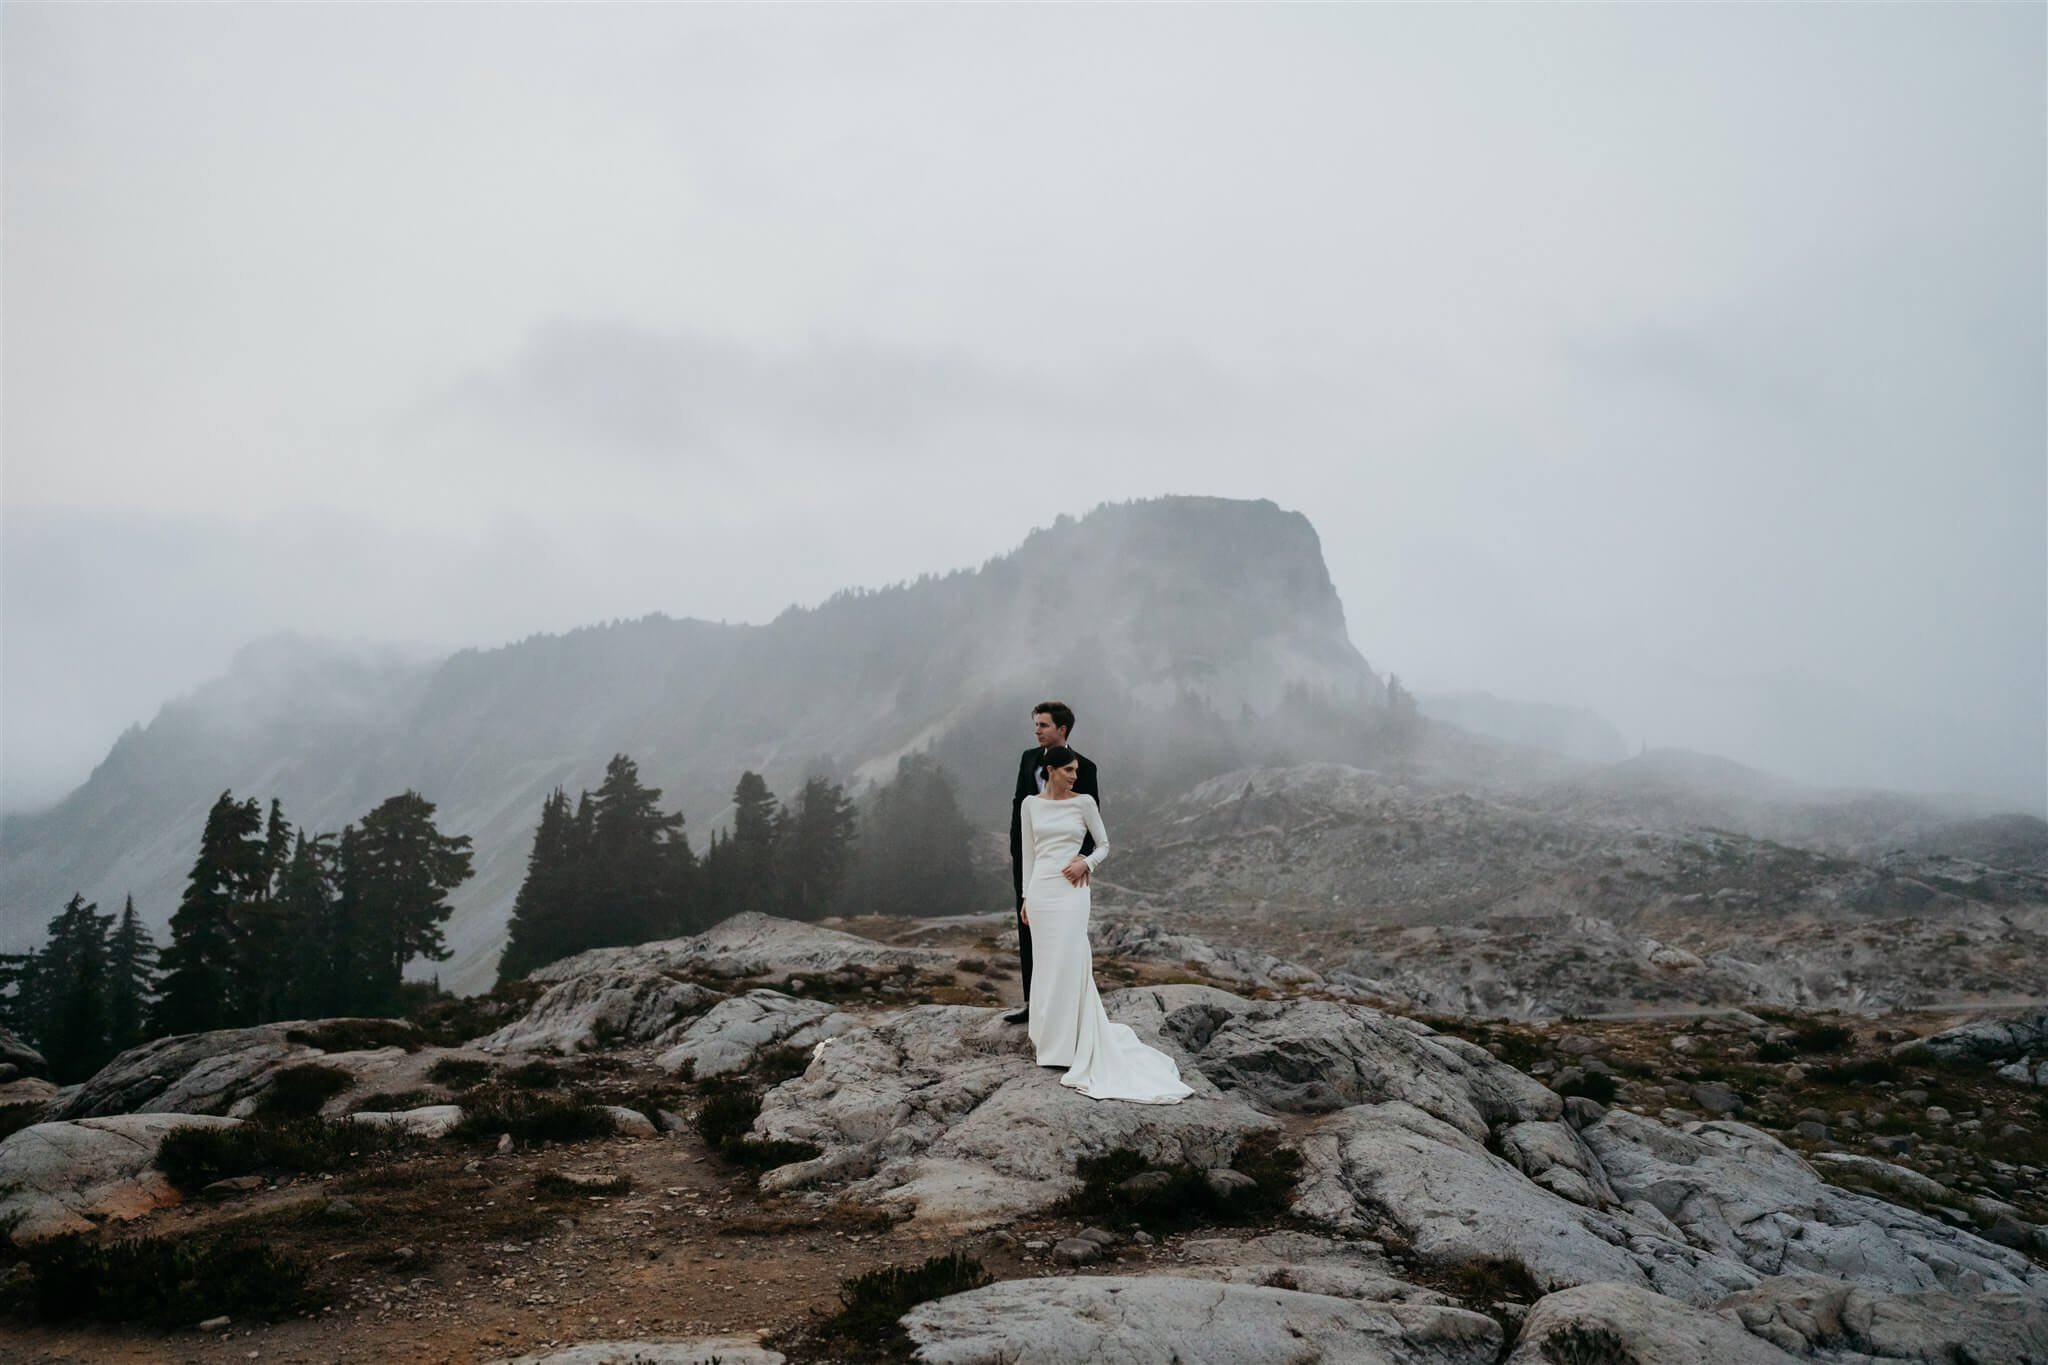 Bride and groom adventure portraits at foggy Artist Point elopement